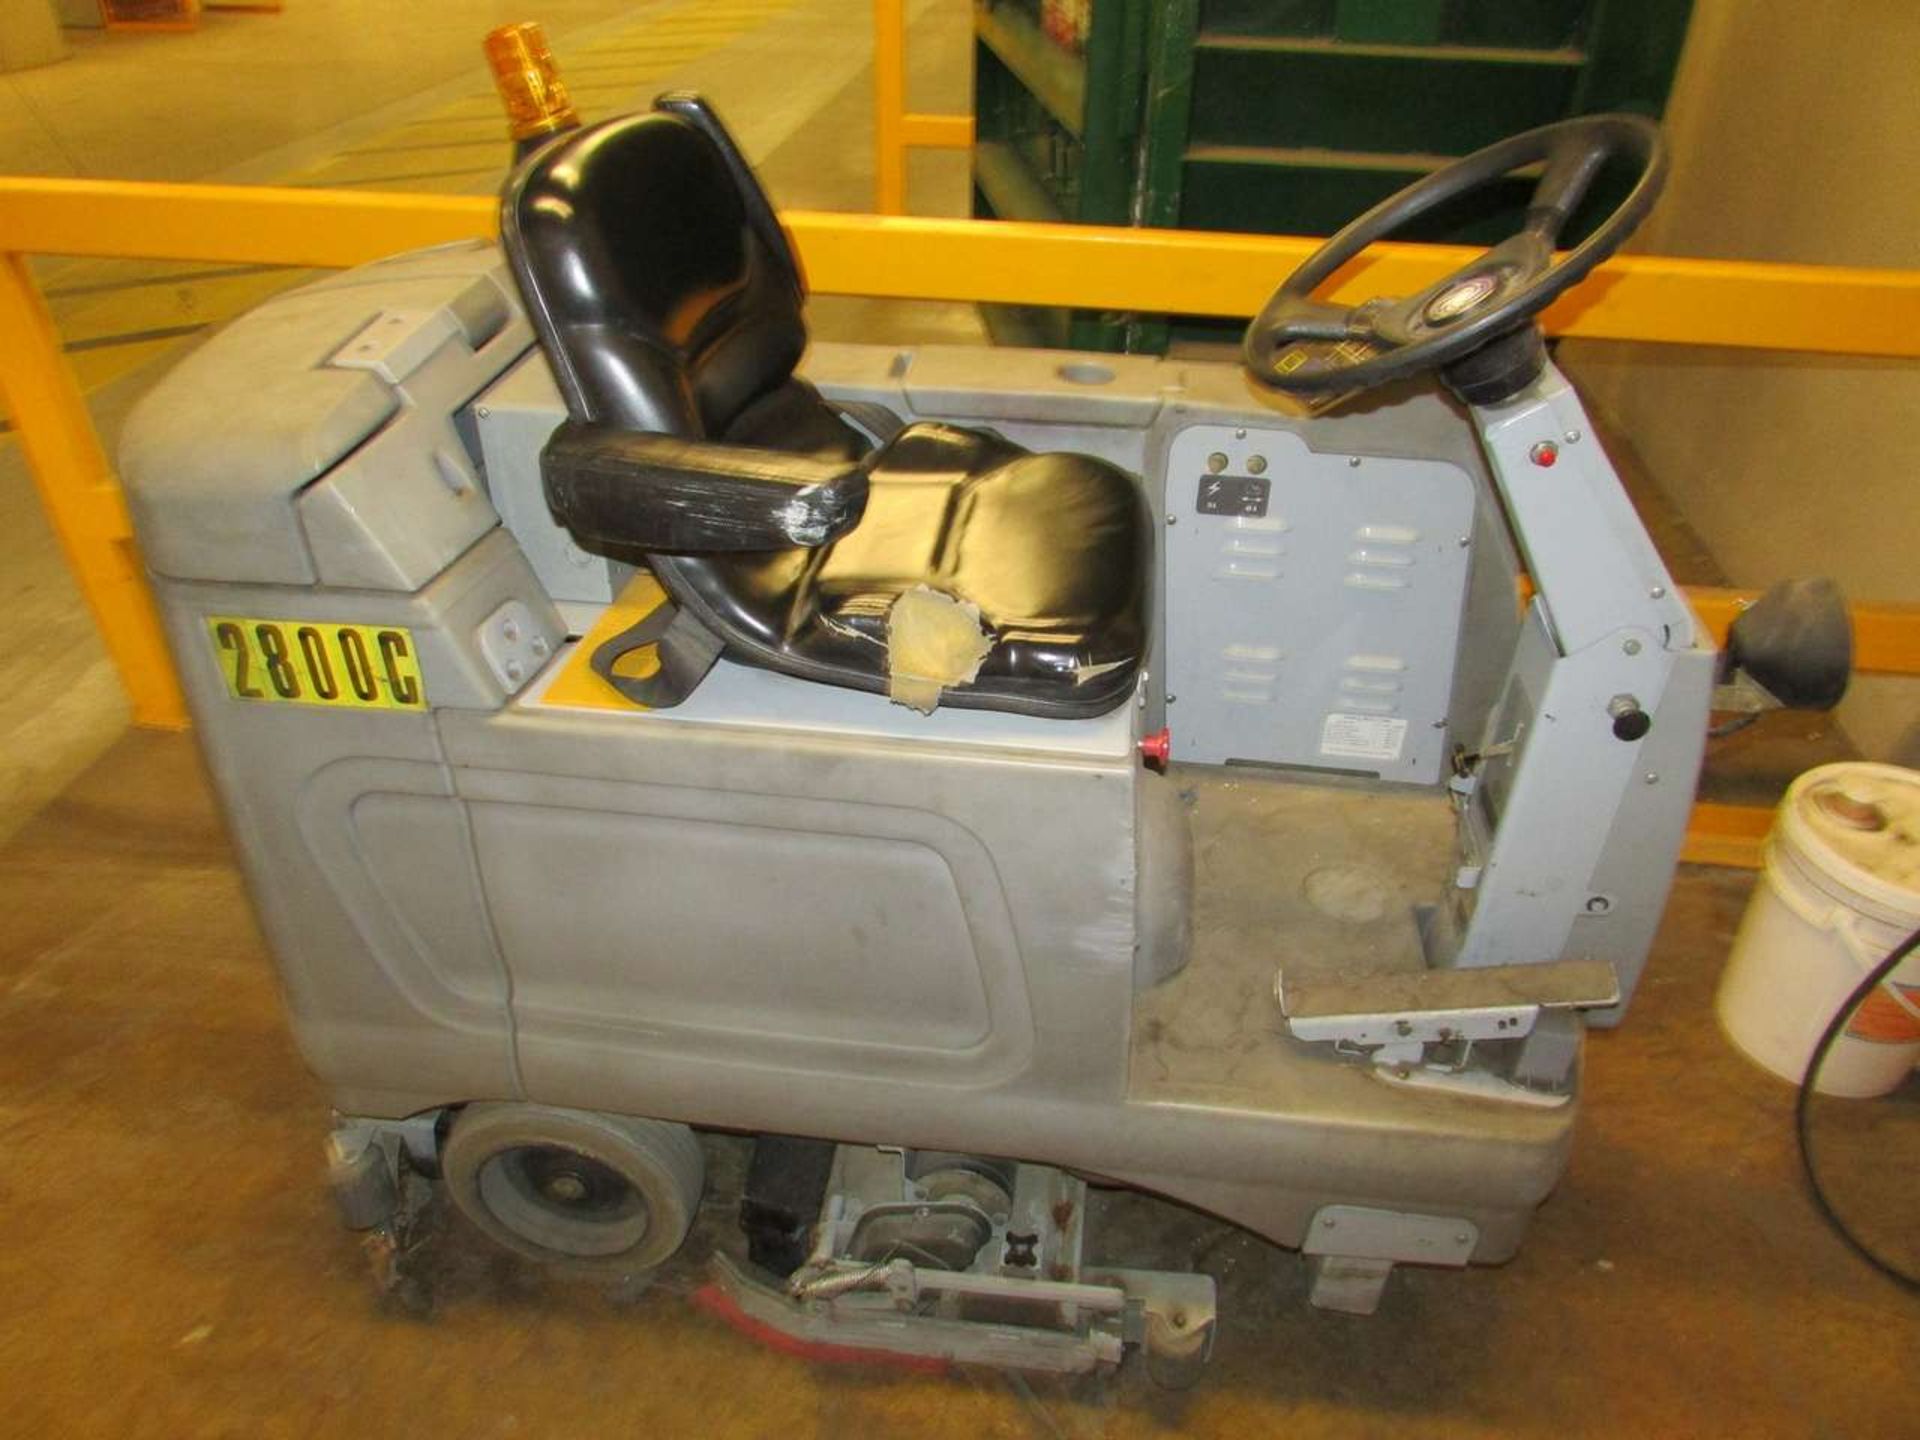 2001 Advance HR-2800C Electric Floor Scrubber - Image 3 of 6